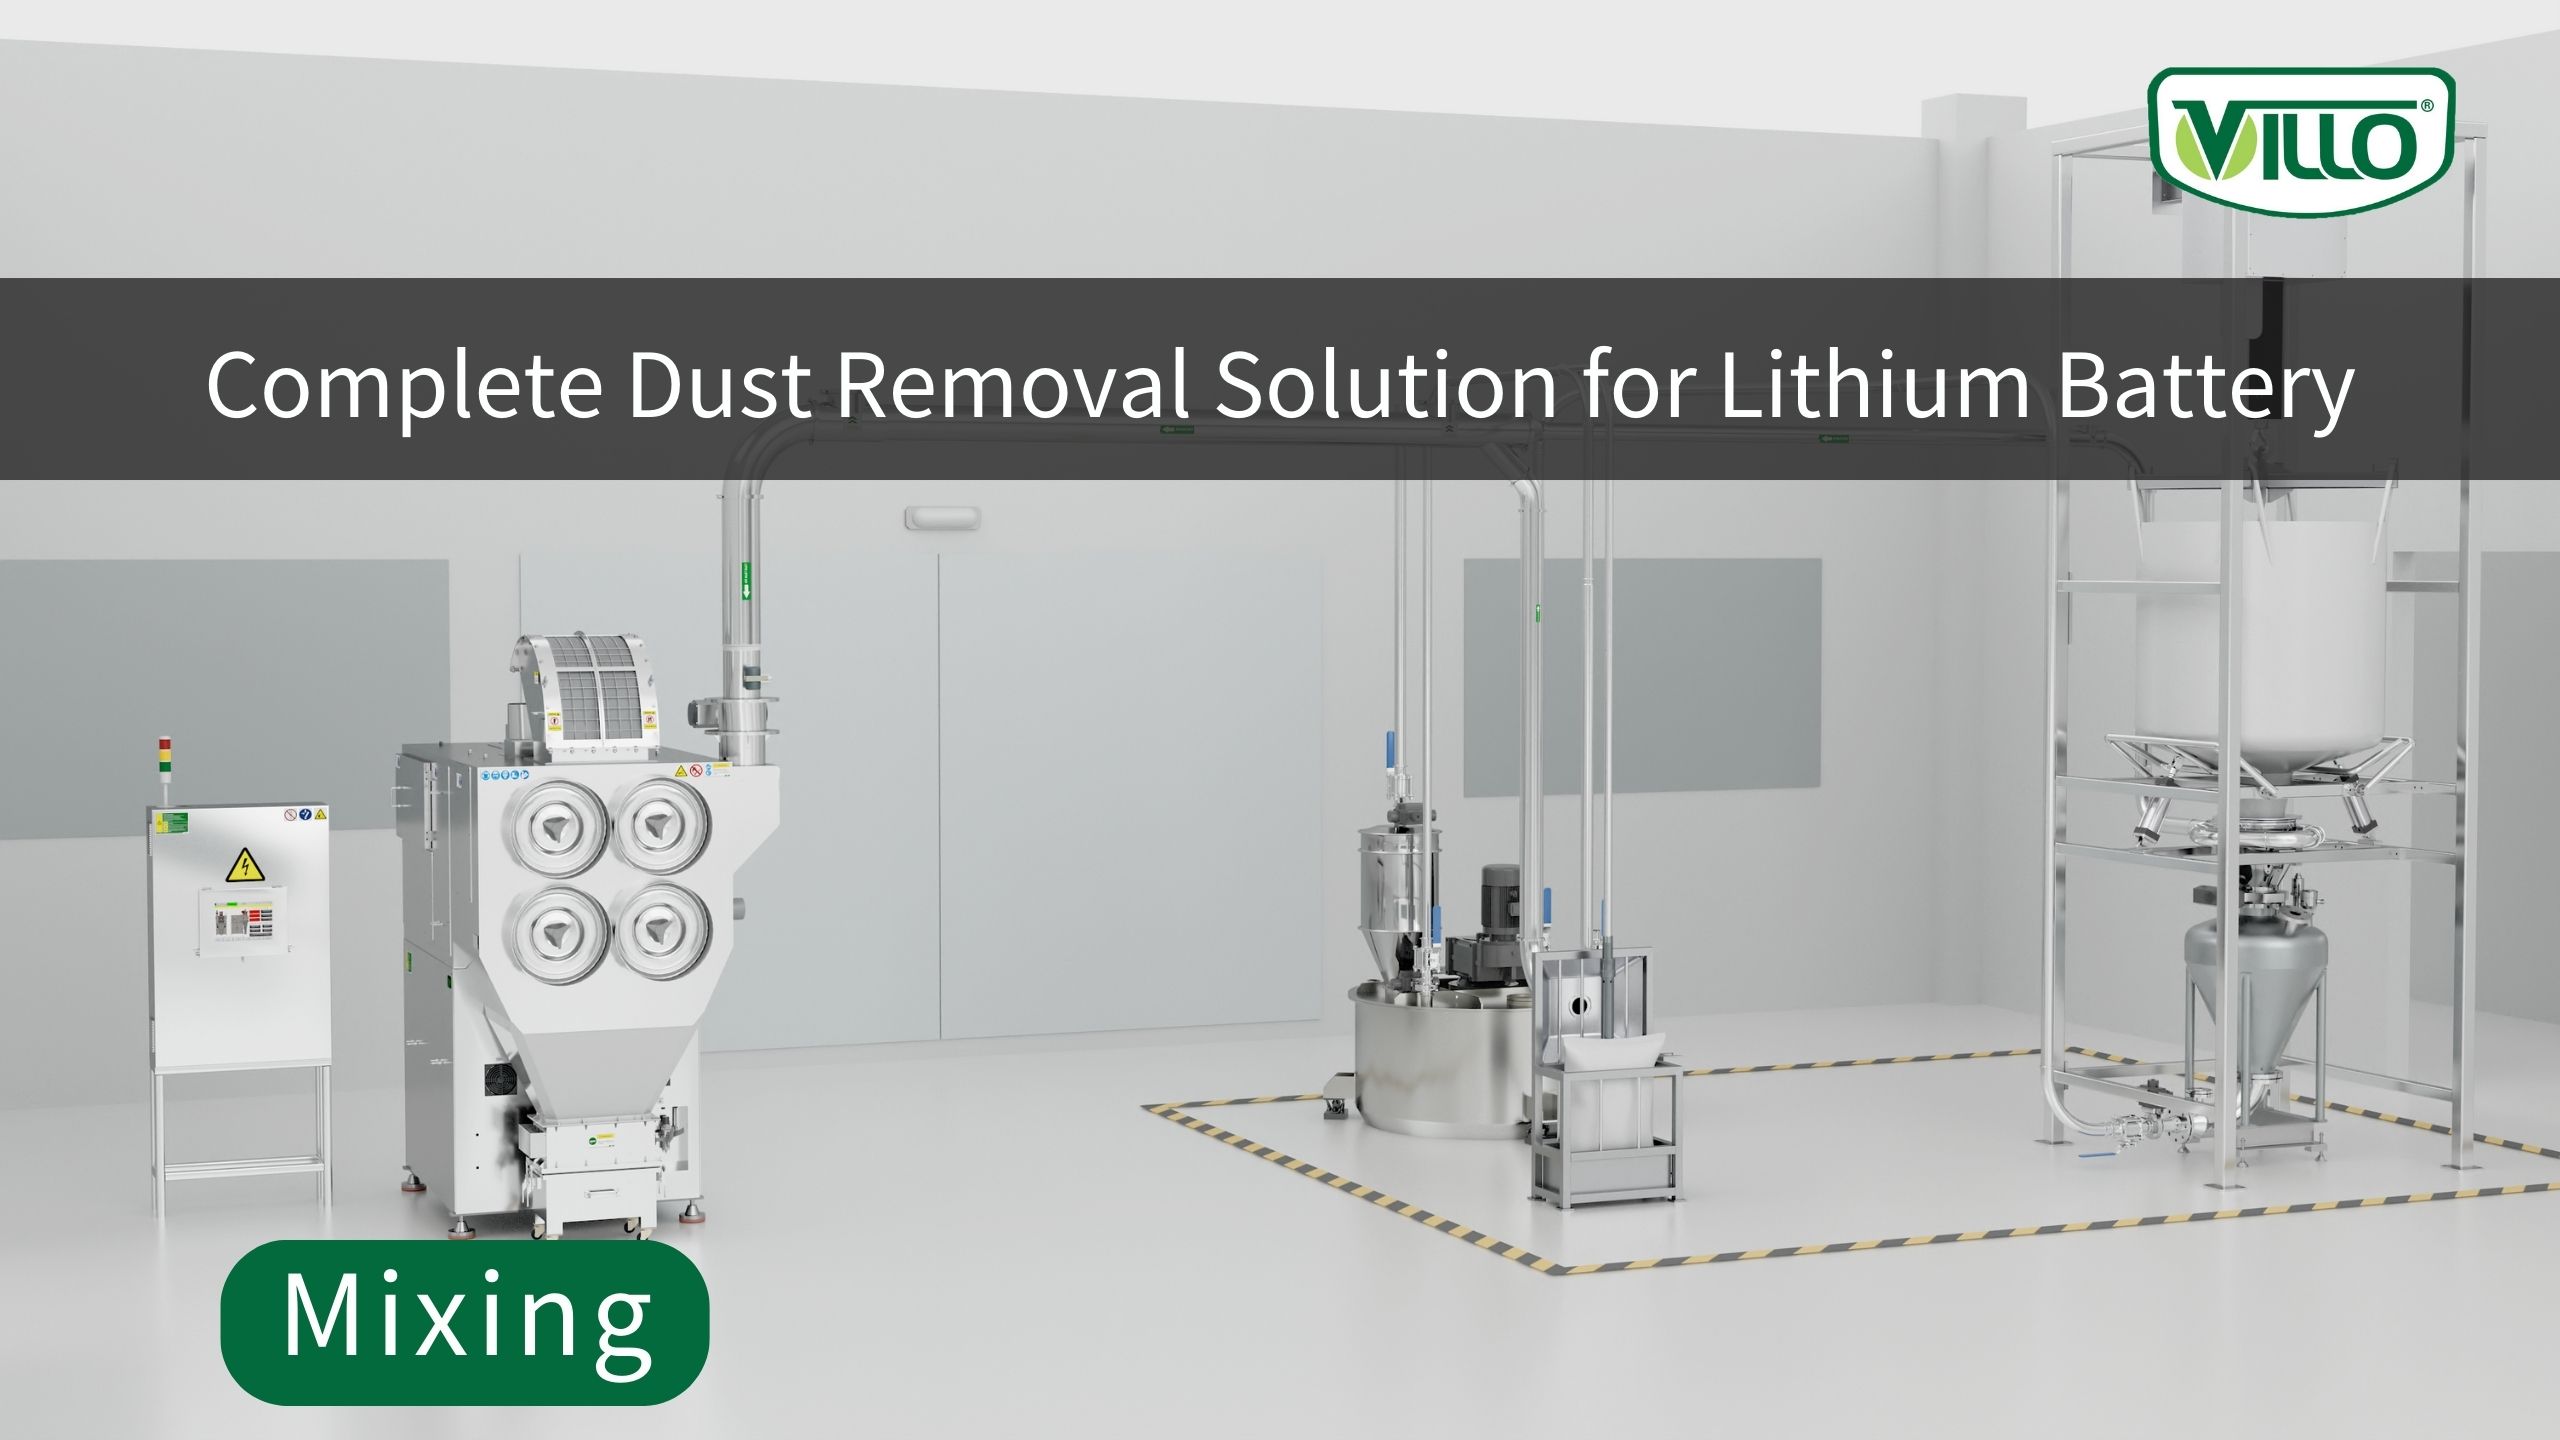 Dust Collection Solutions: Mixing & Feeding